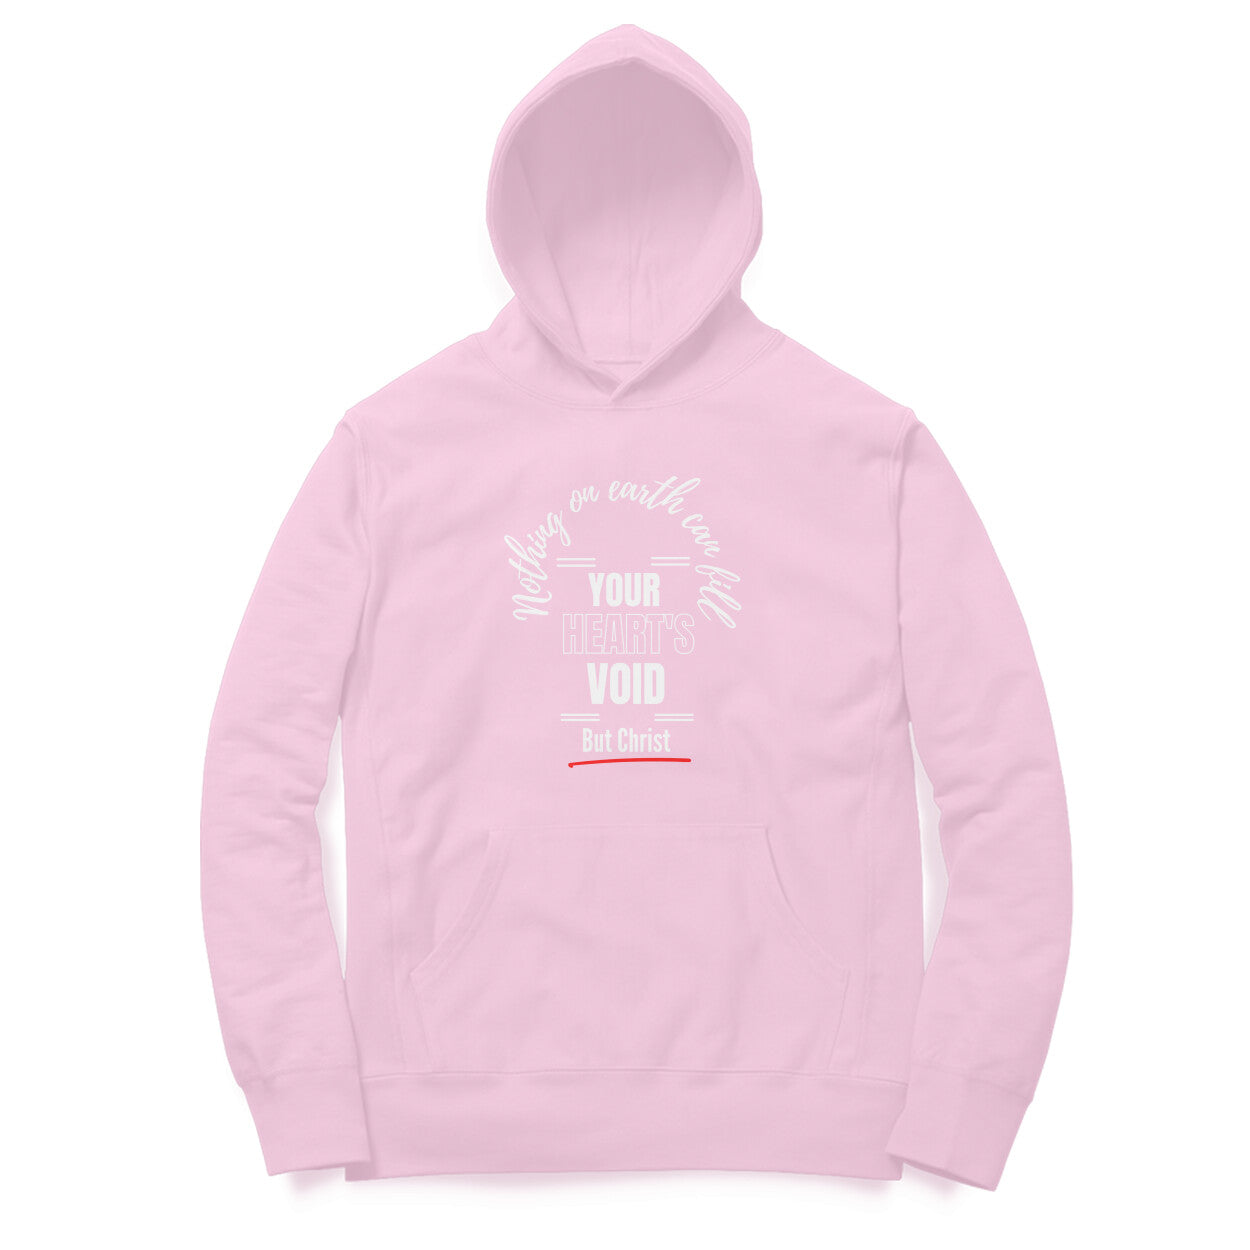 Fill the void' hoodie